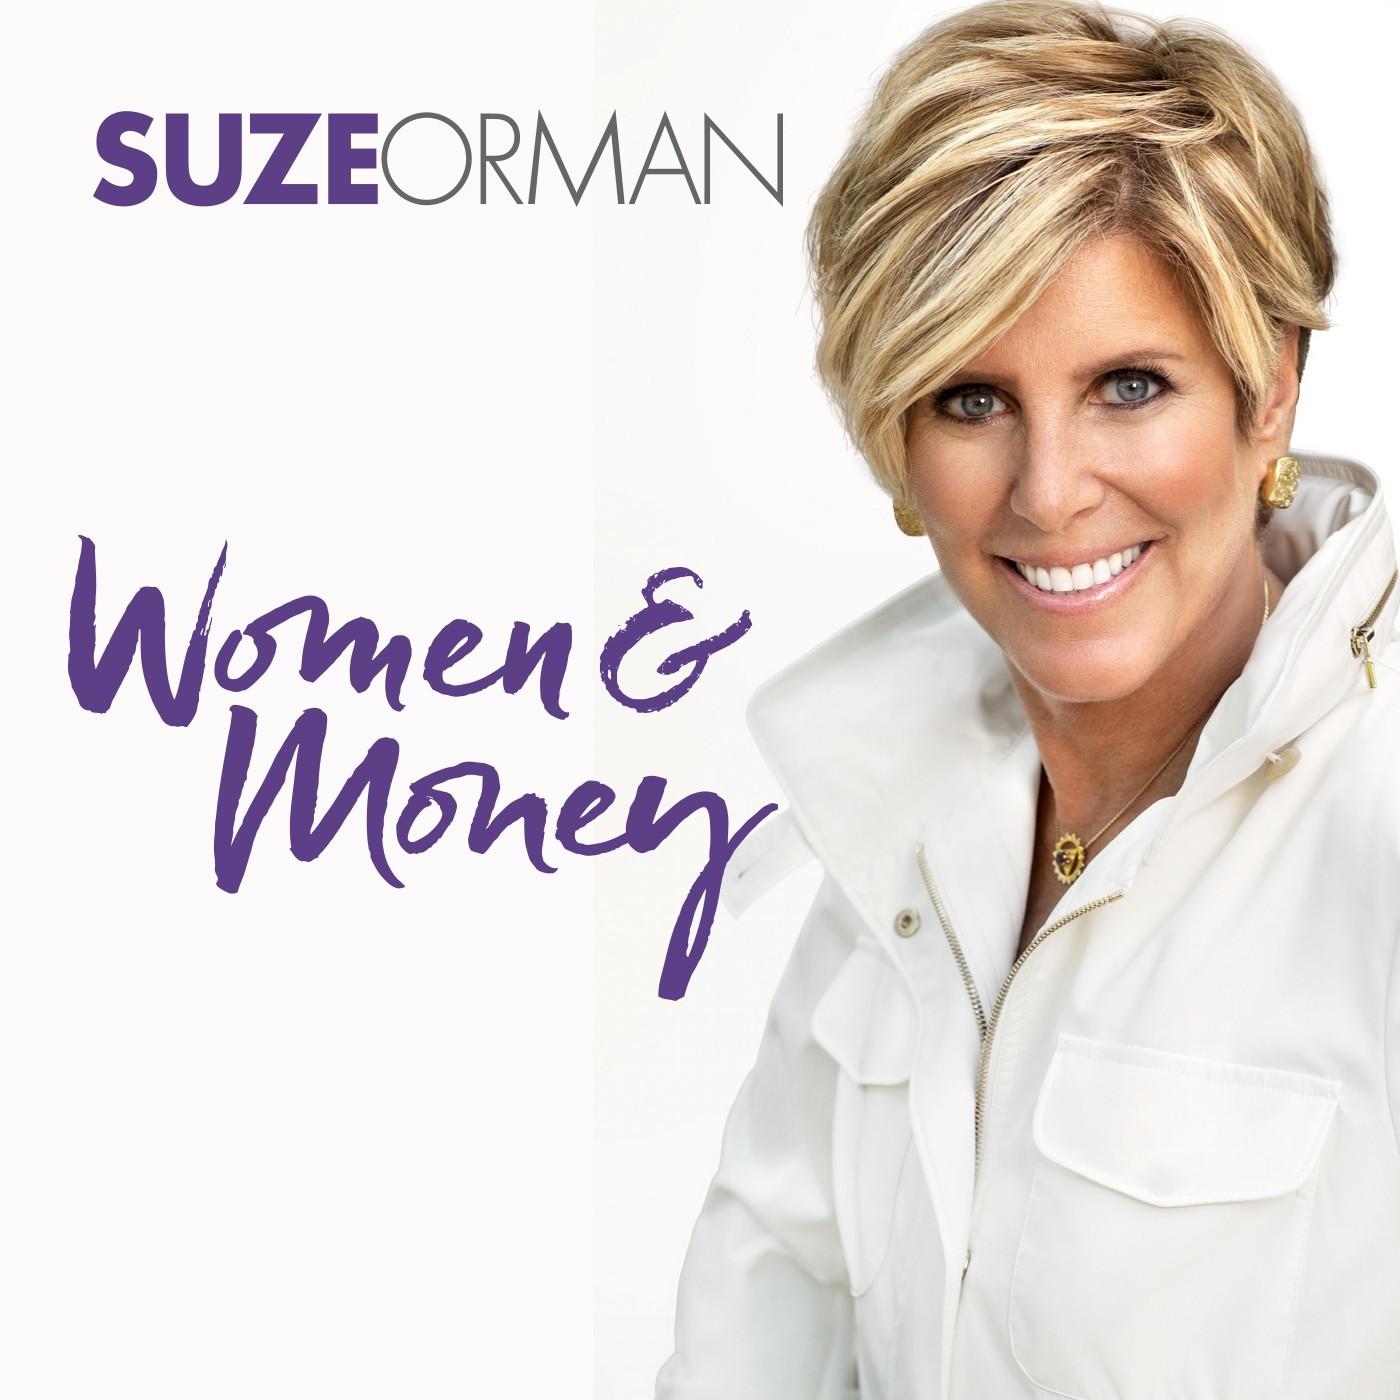 SEASON II OF SUZE ORMAN’S ALL-NEW WOMEN AND MONEY PODCAST LAUNCHES WITH INTERACTIVE FEATURES